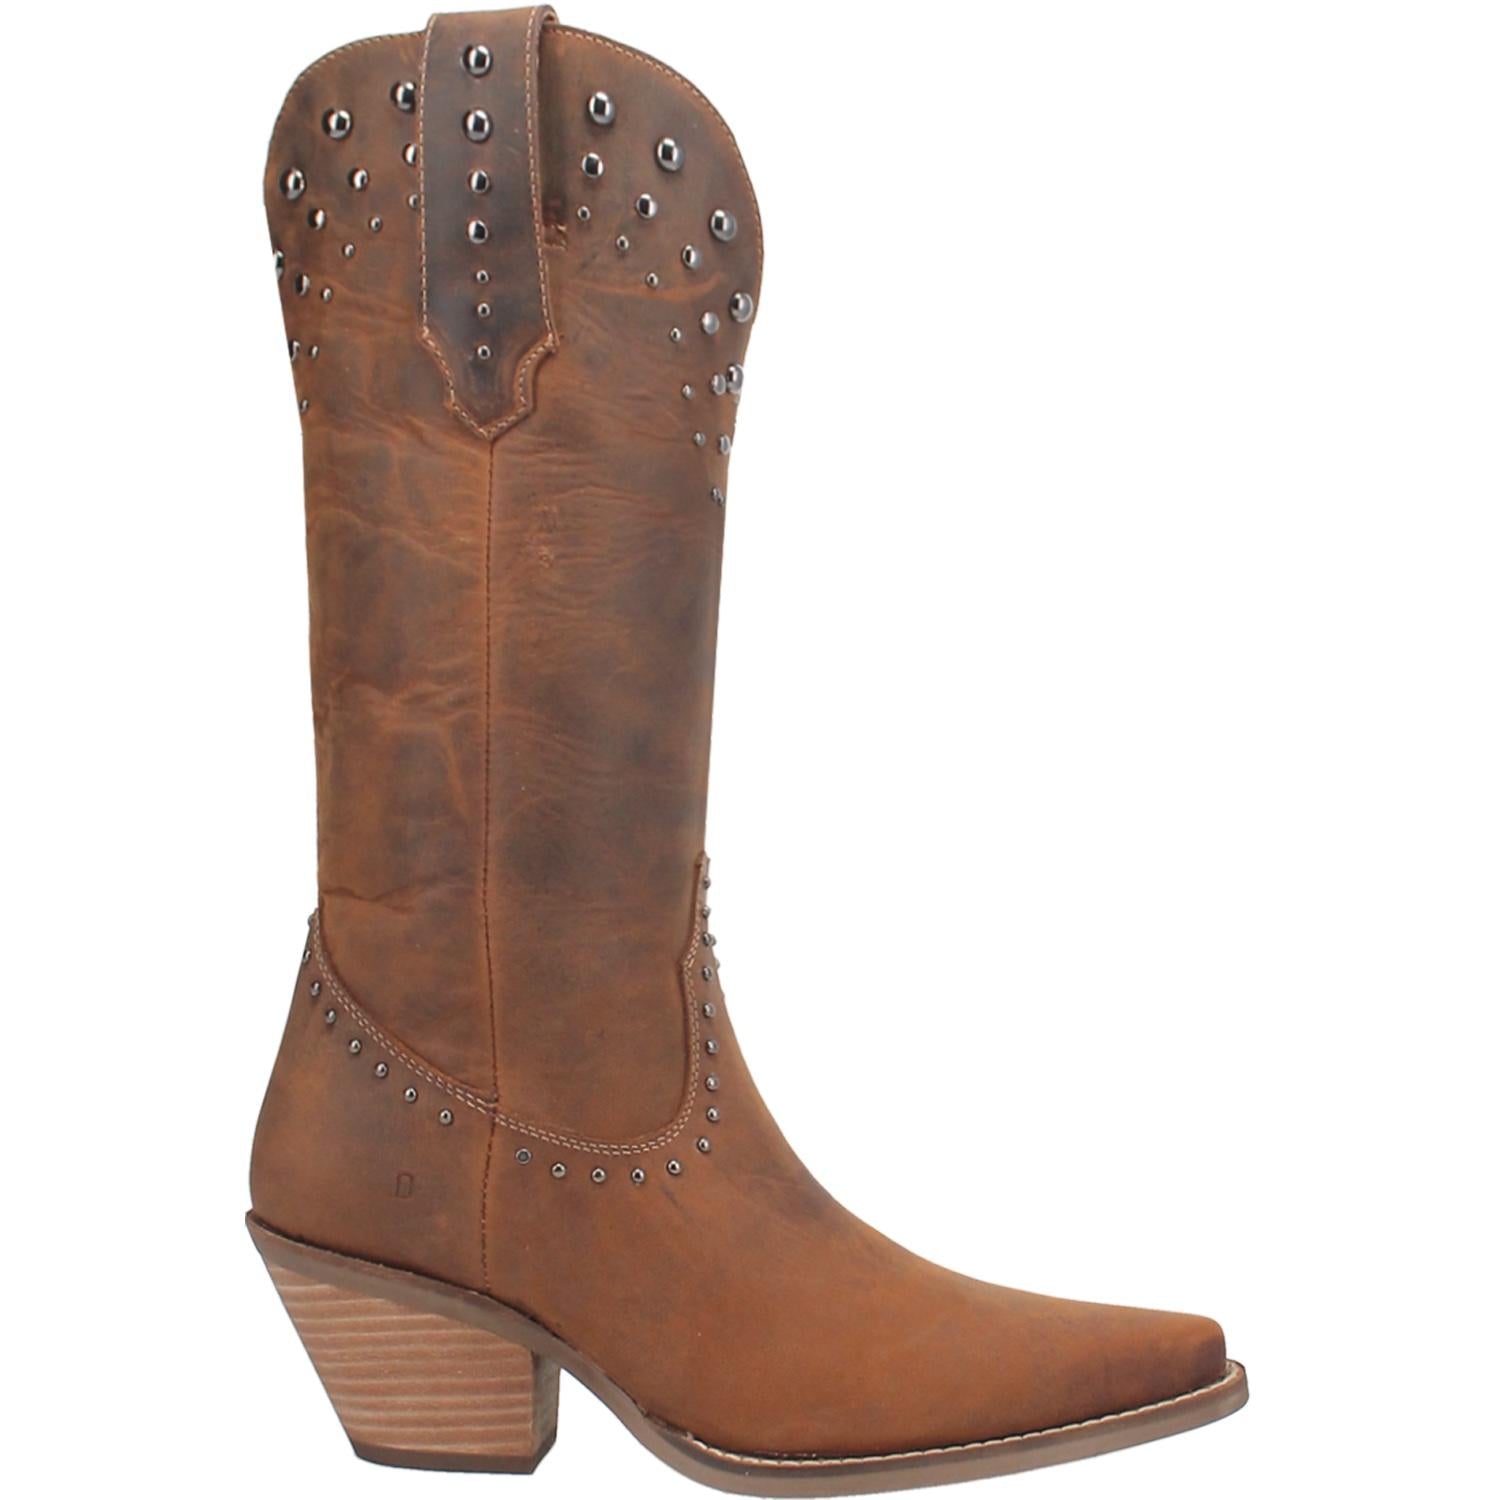 A brown mid calf length leather boot. Features silver stud designs on the top and middle of boot, leather straps, short heel, V cut at the top, and off white stitching. Item is pictured on a plain white background